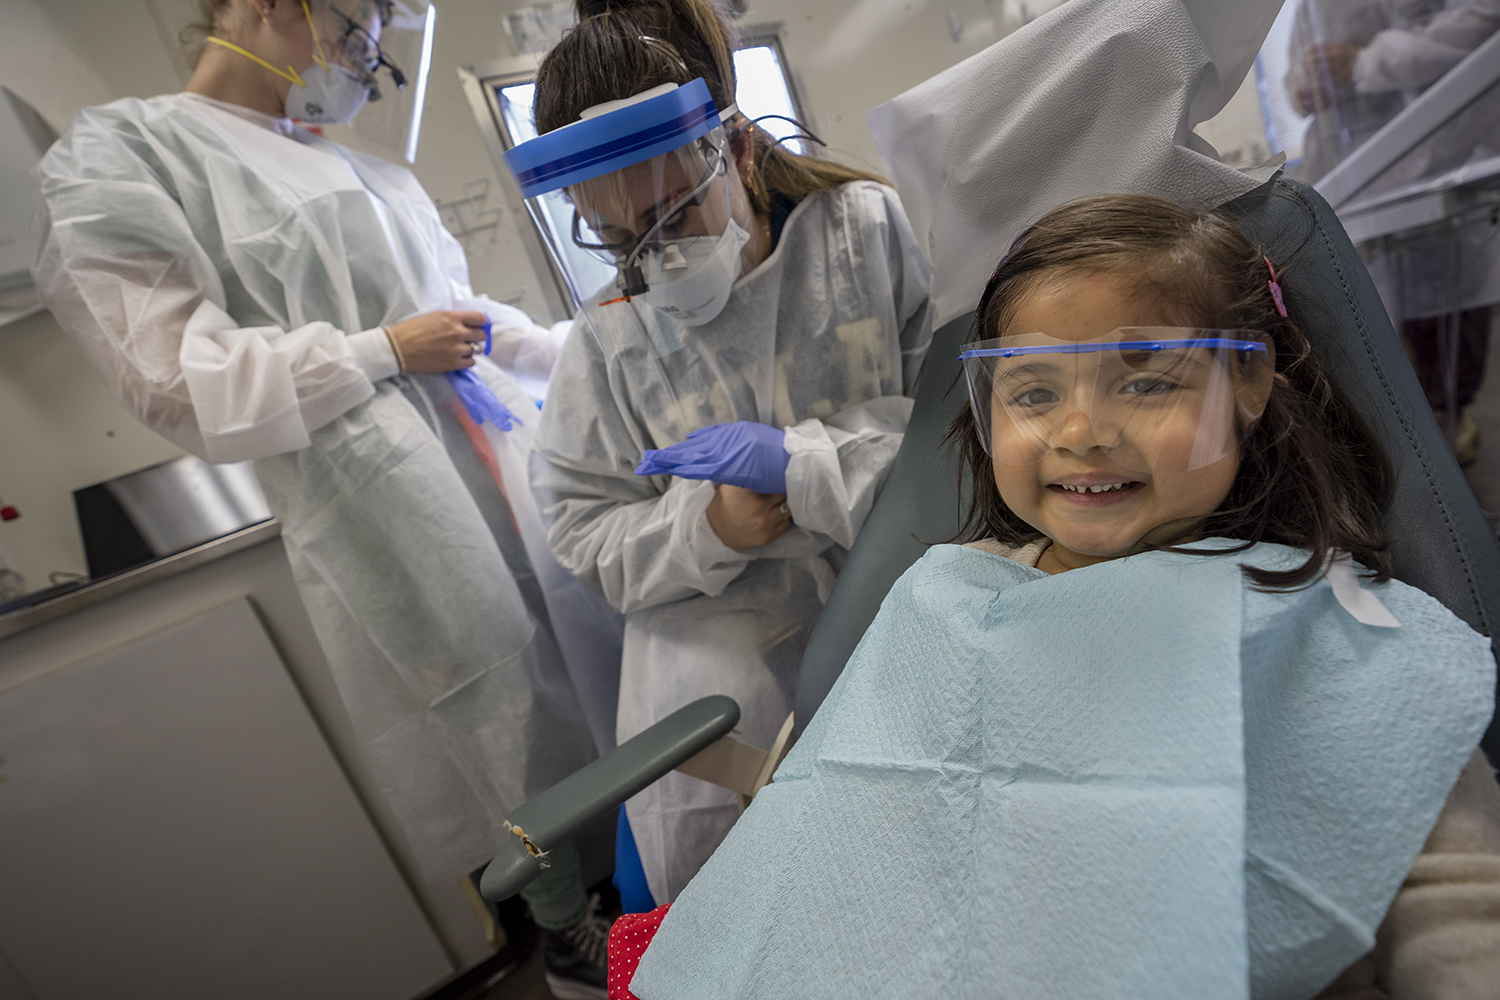 Little girl smiling in a mobile dental clinic with dental students behind her